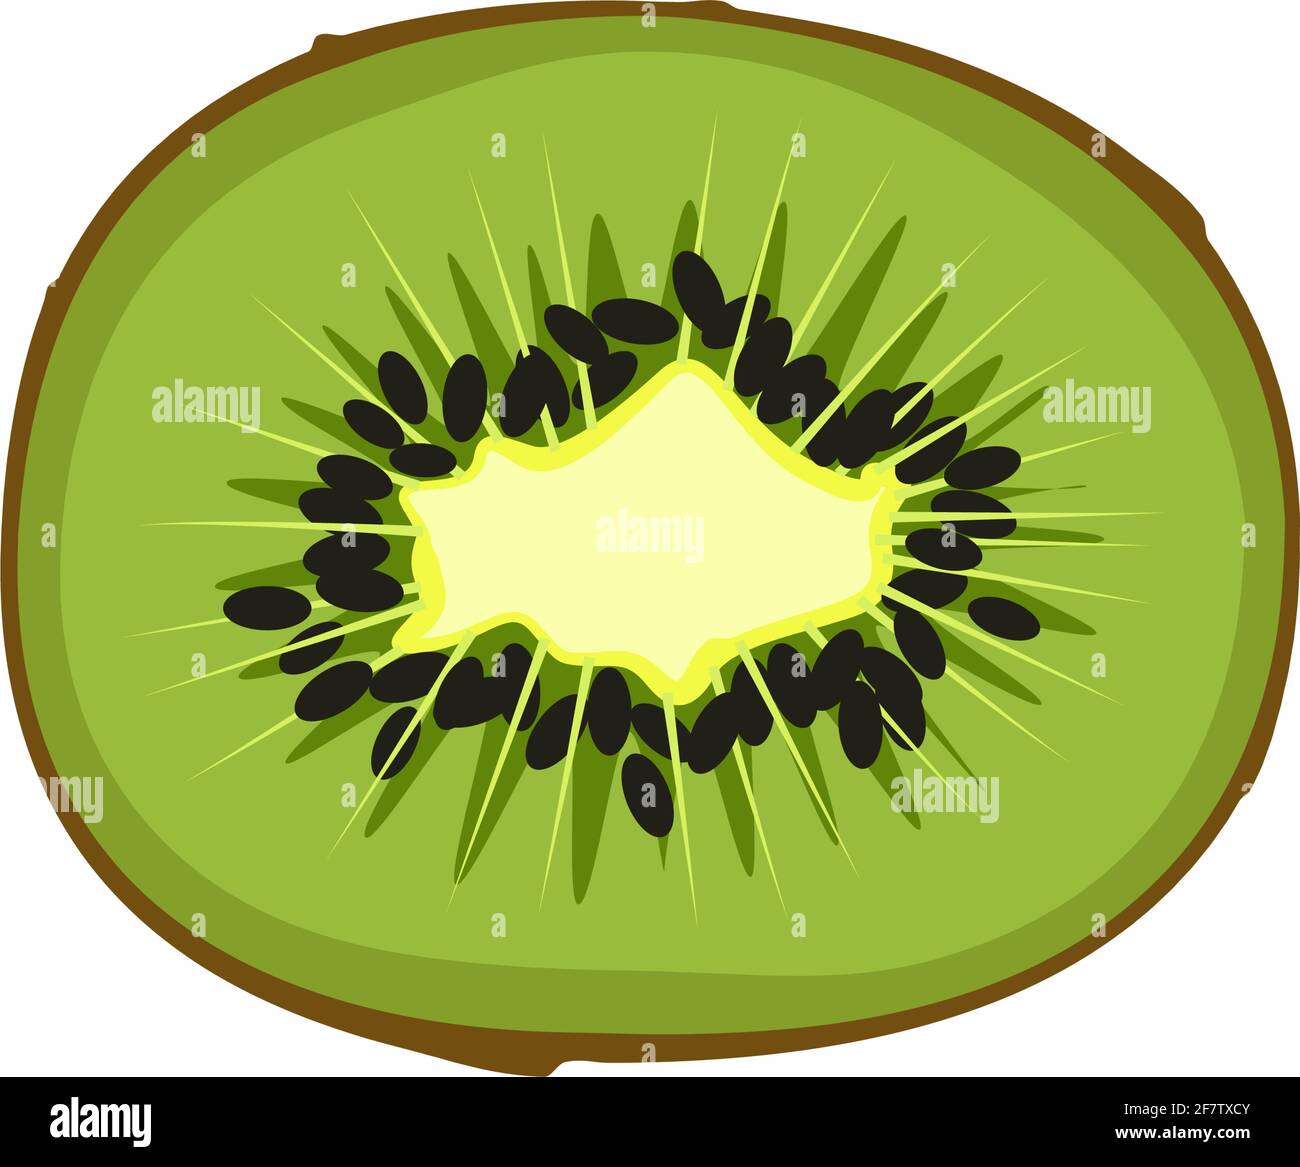 Kiwi icon. A source of vitamin C. Healthy exotic fruit with seeds. Delicious snack or dessert. Stock Vector